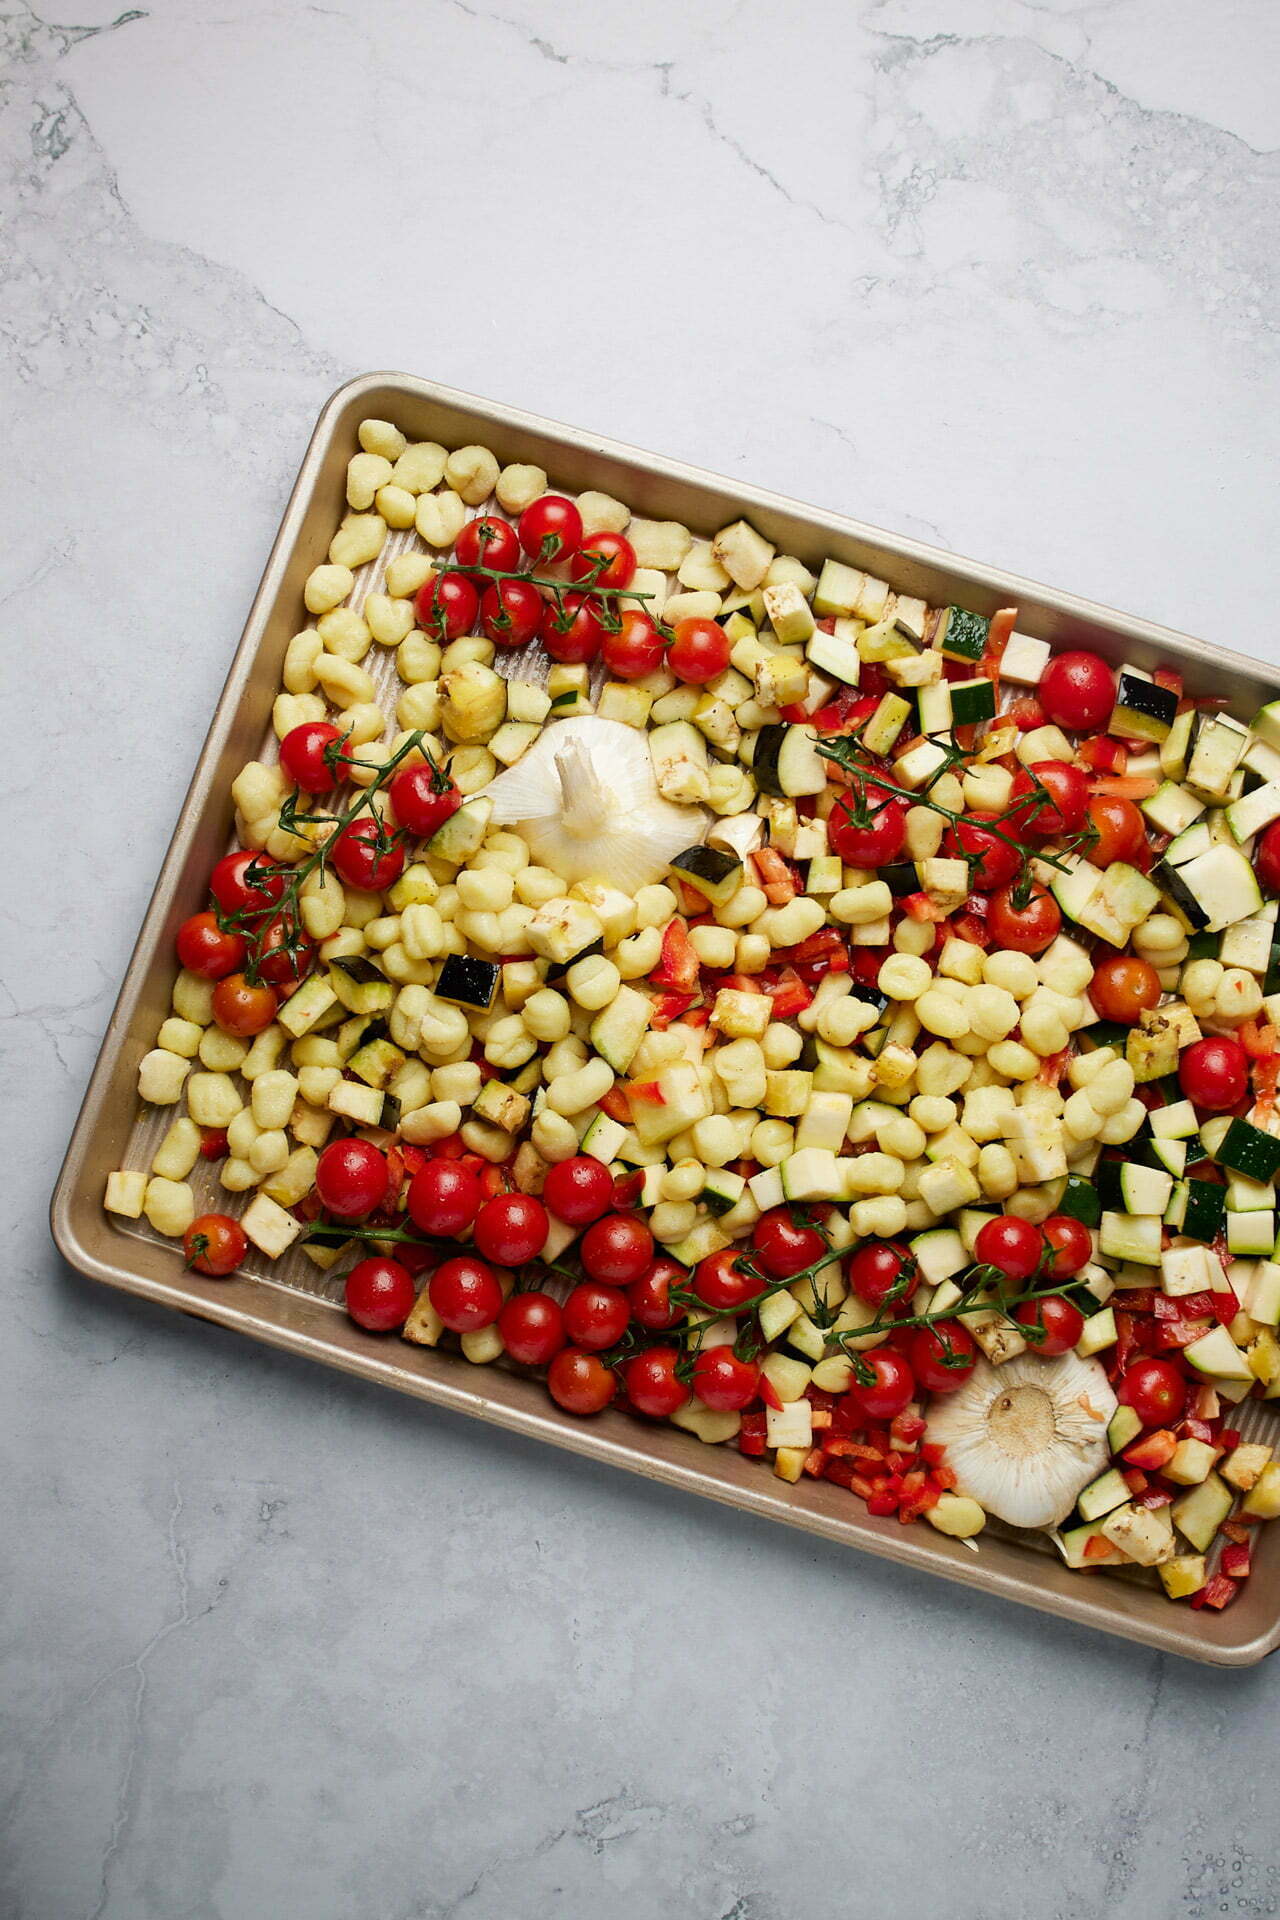 A sheet pan filled with chopped vegetables, including yellow potatoes, zucchini, red bell peppers, cherry tomatoes, and whole garlic cloves, sits on a light marble surface. The vibrant array of colors is beautifully complemented by dollops of herbed butter throughout the vegetables before roasting.